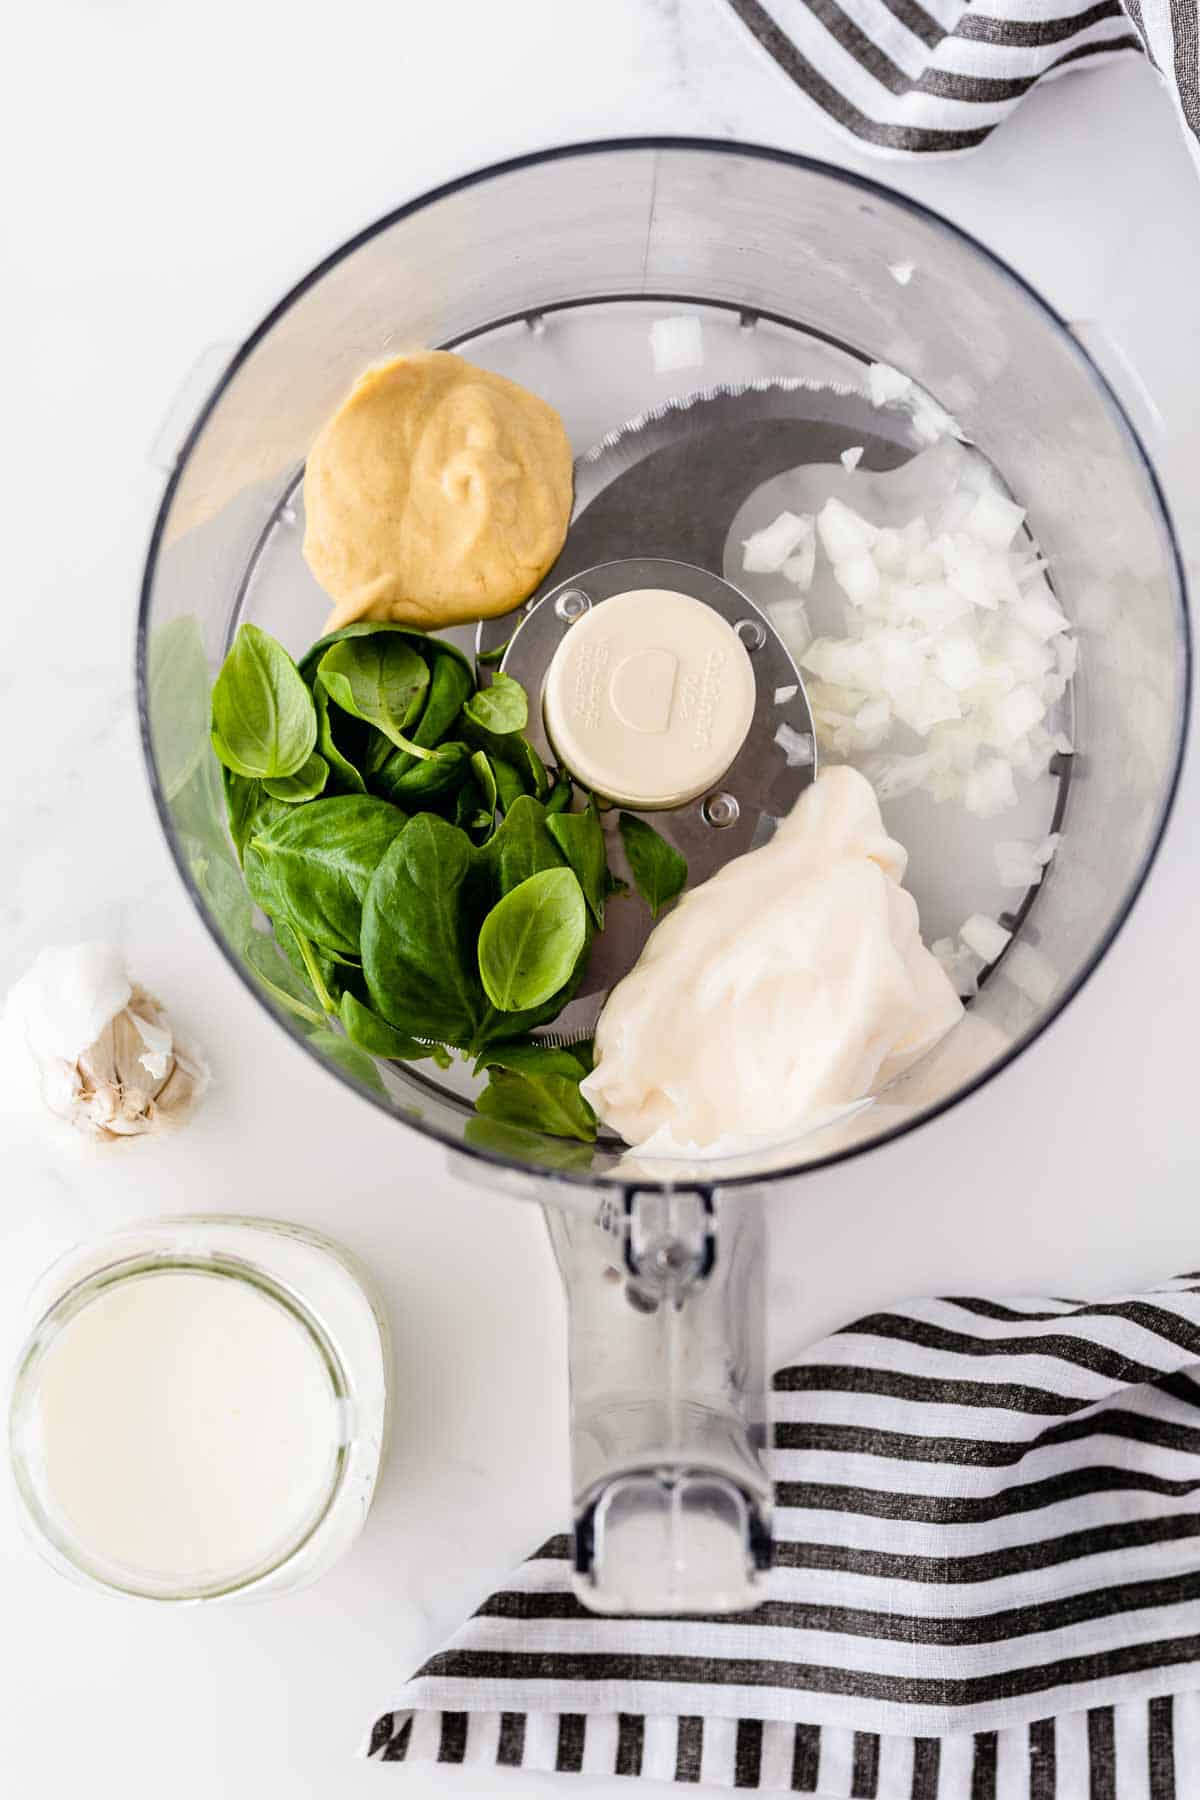 All the ingredients required to make Basil Buttermilk Dressing in the bowl of a food processor.